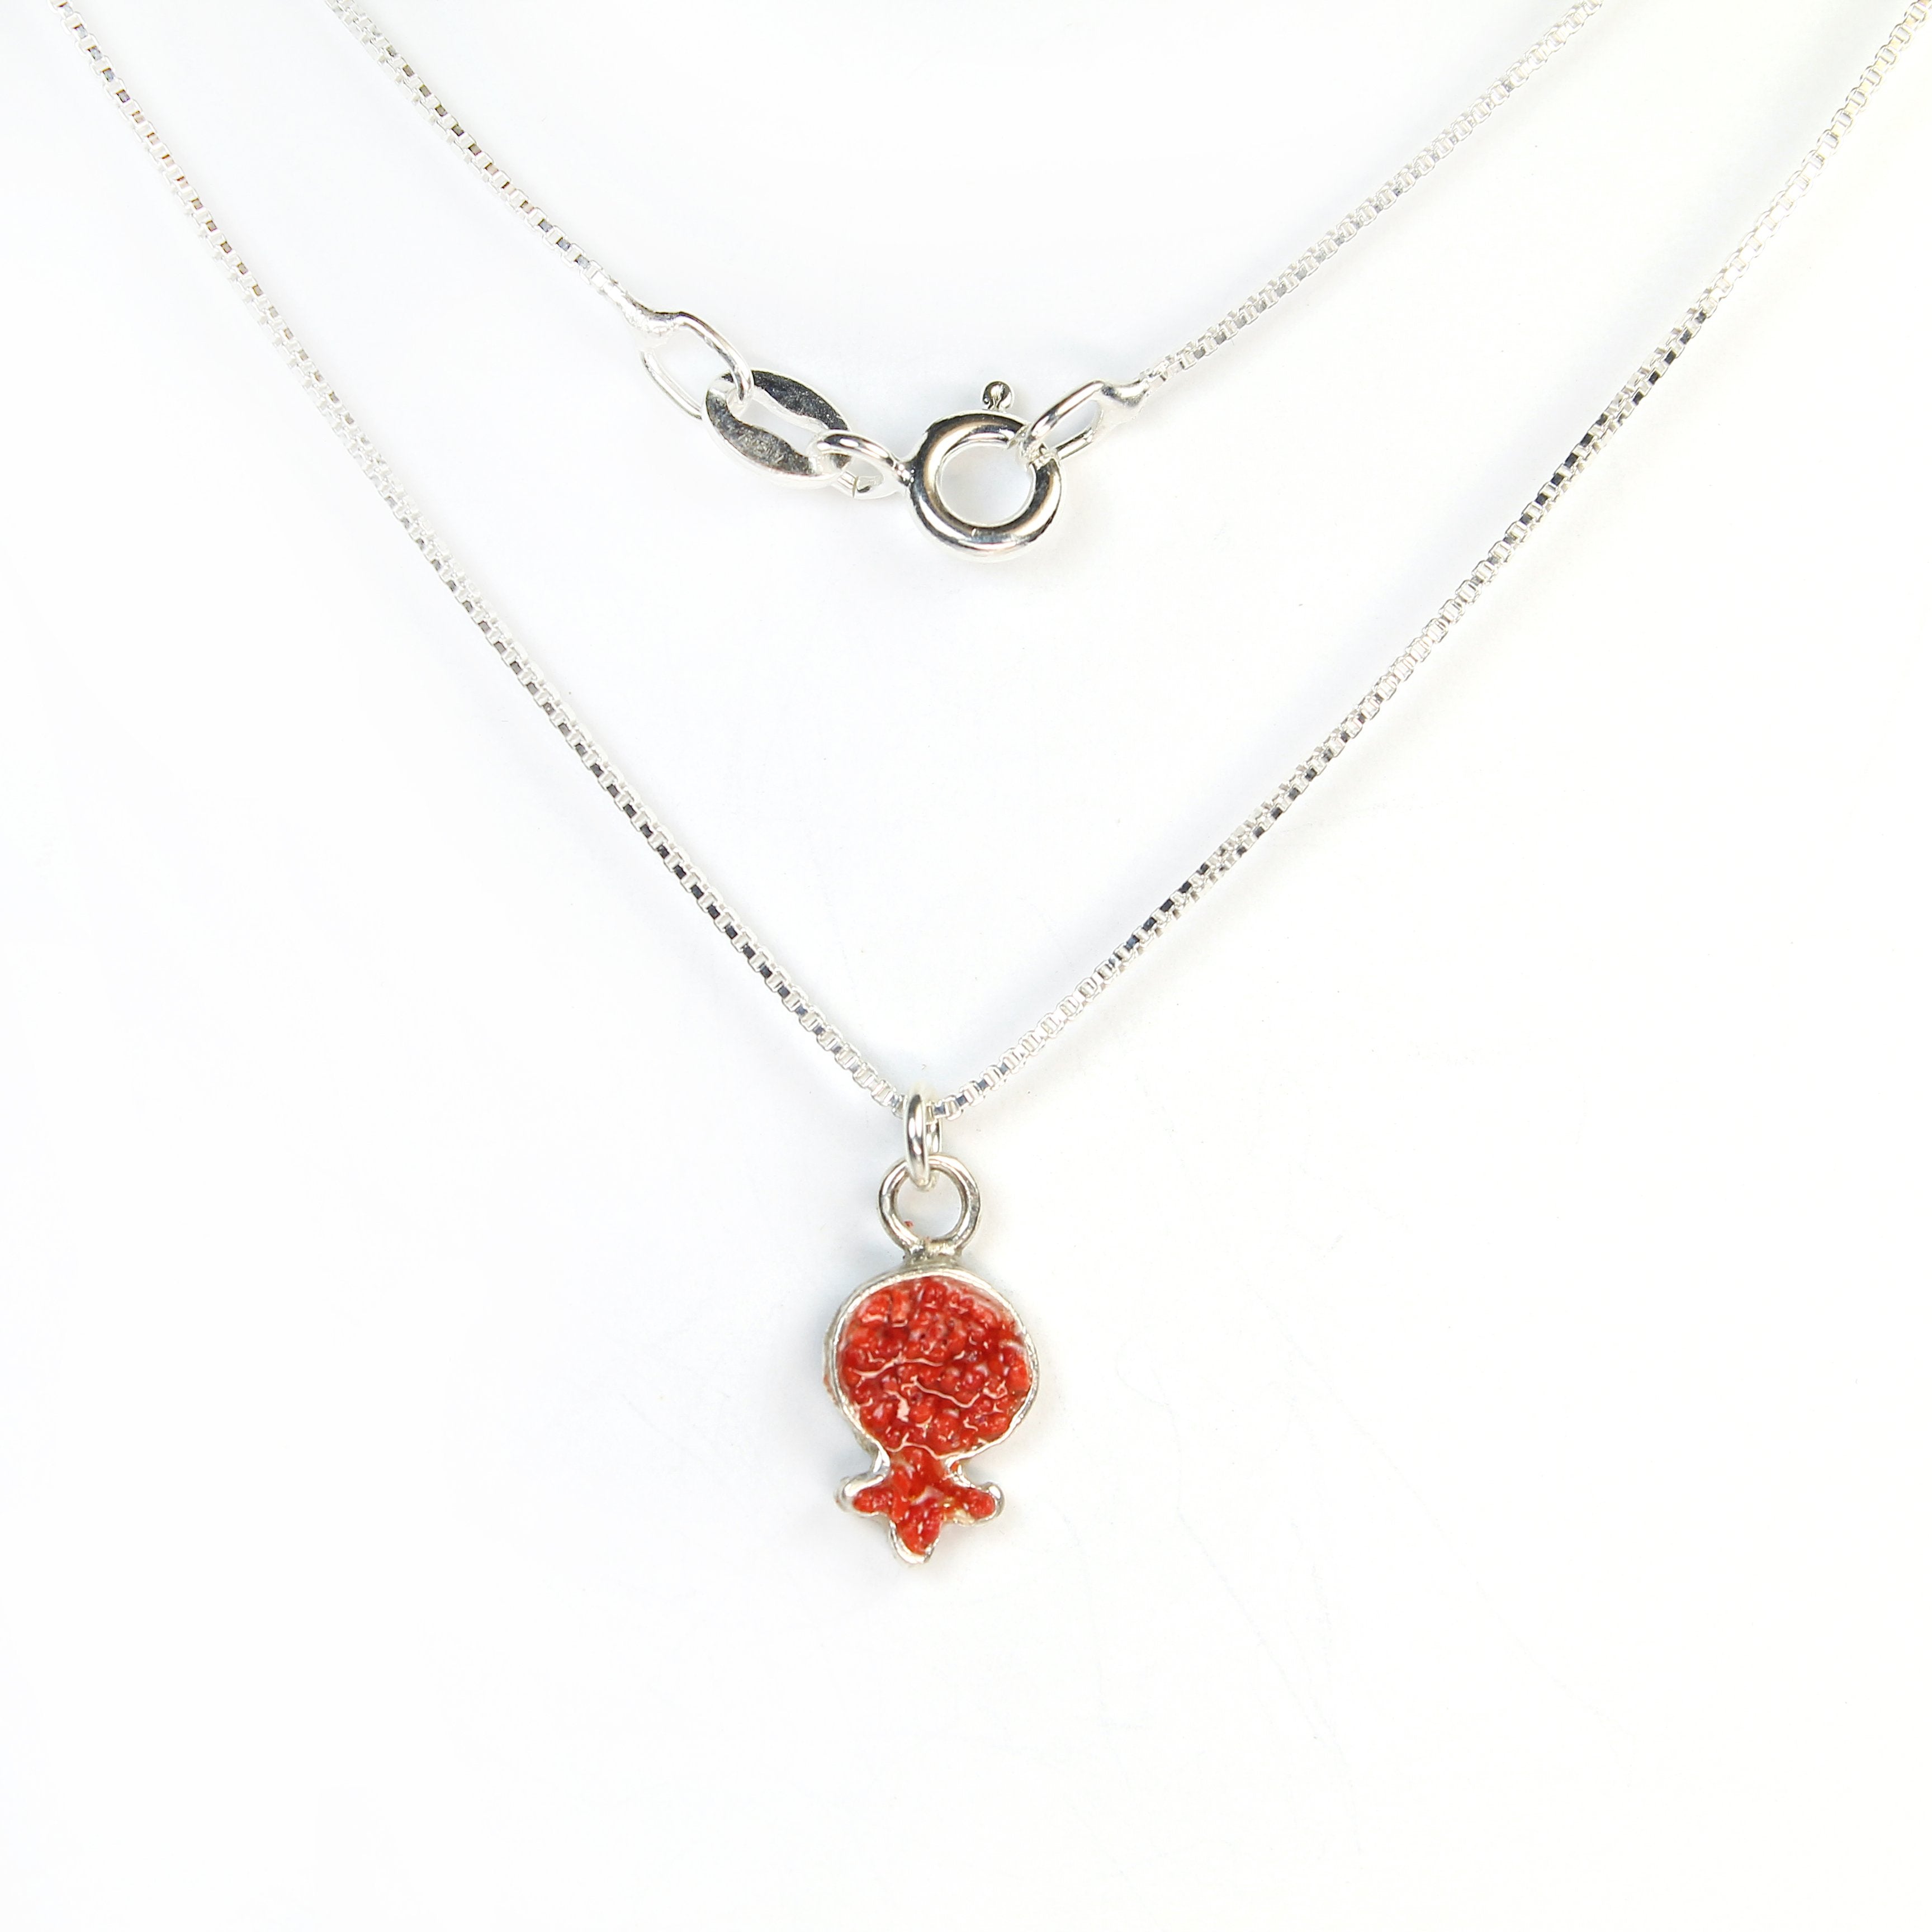 Small Red Pomegranate Necklace with stones - Shulamit Kanter